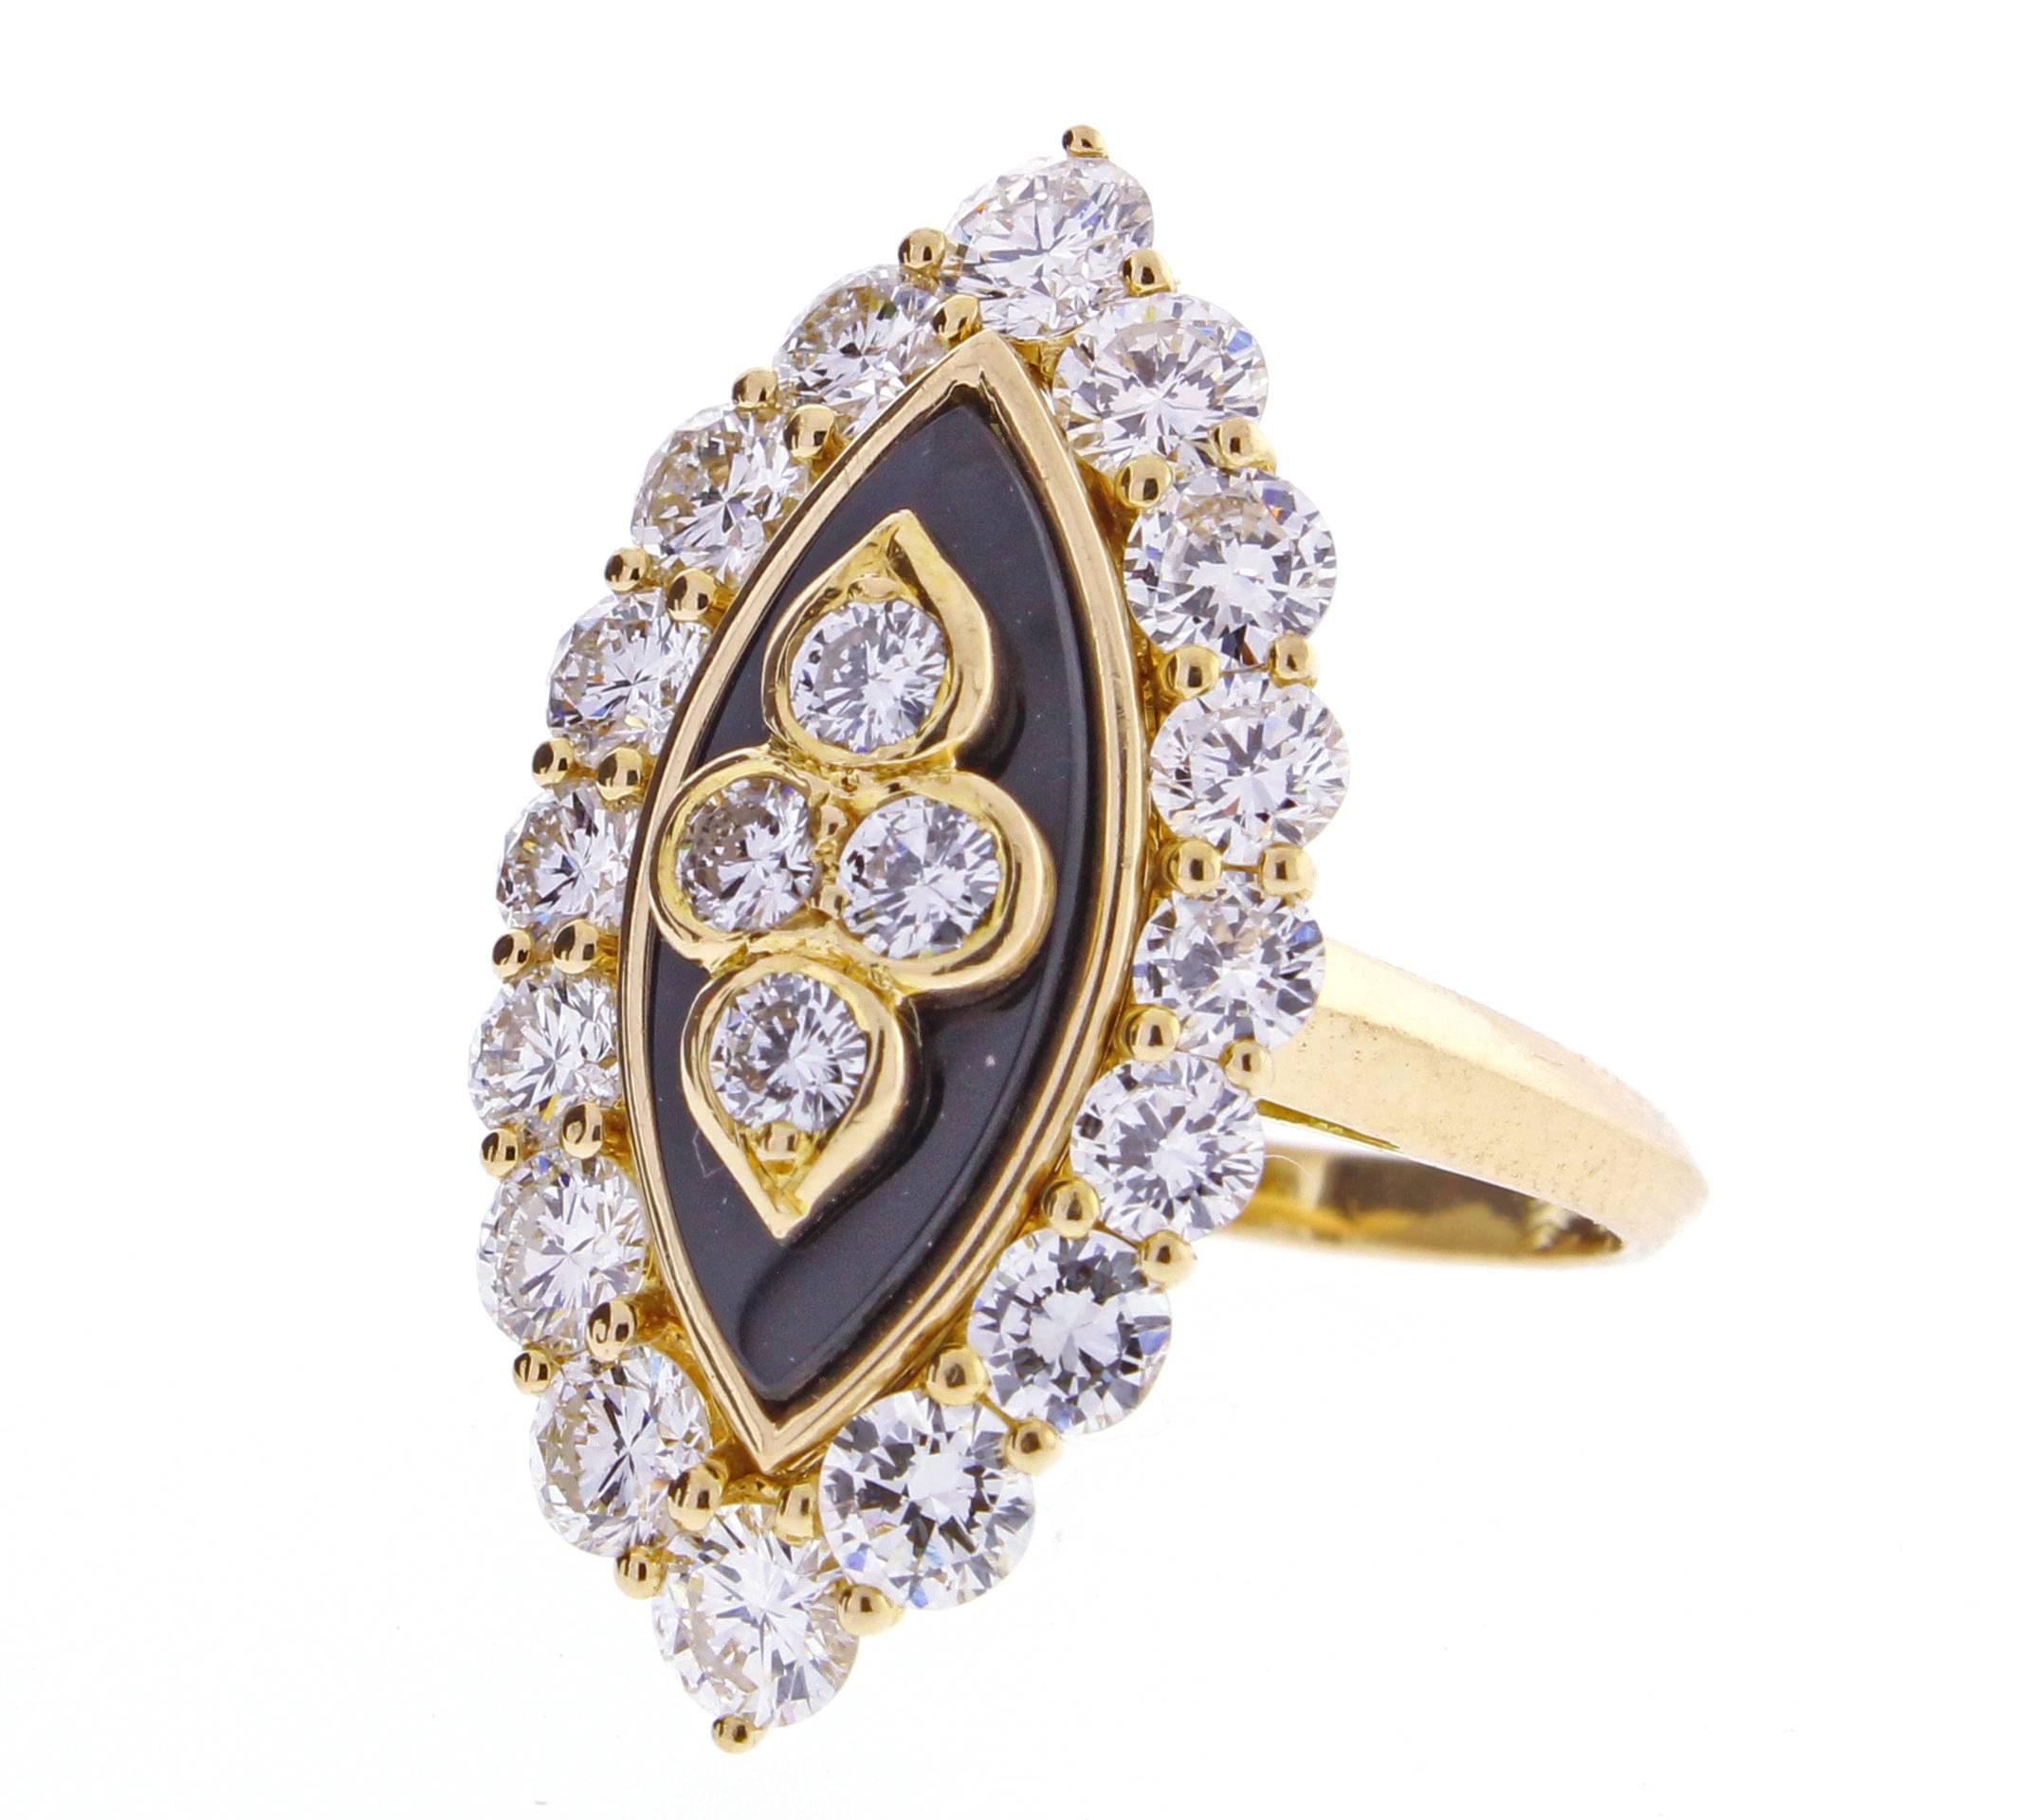 This highly collectable vintage diamond and black onyx navette shape boast twenty brilliant diamonds weighing approximately 2.50 carats, set in 18 karat gold. Signed VCA for Van Cleef & Arpels and numbered 5K89.4 with French hallmarks. The ring